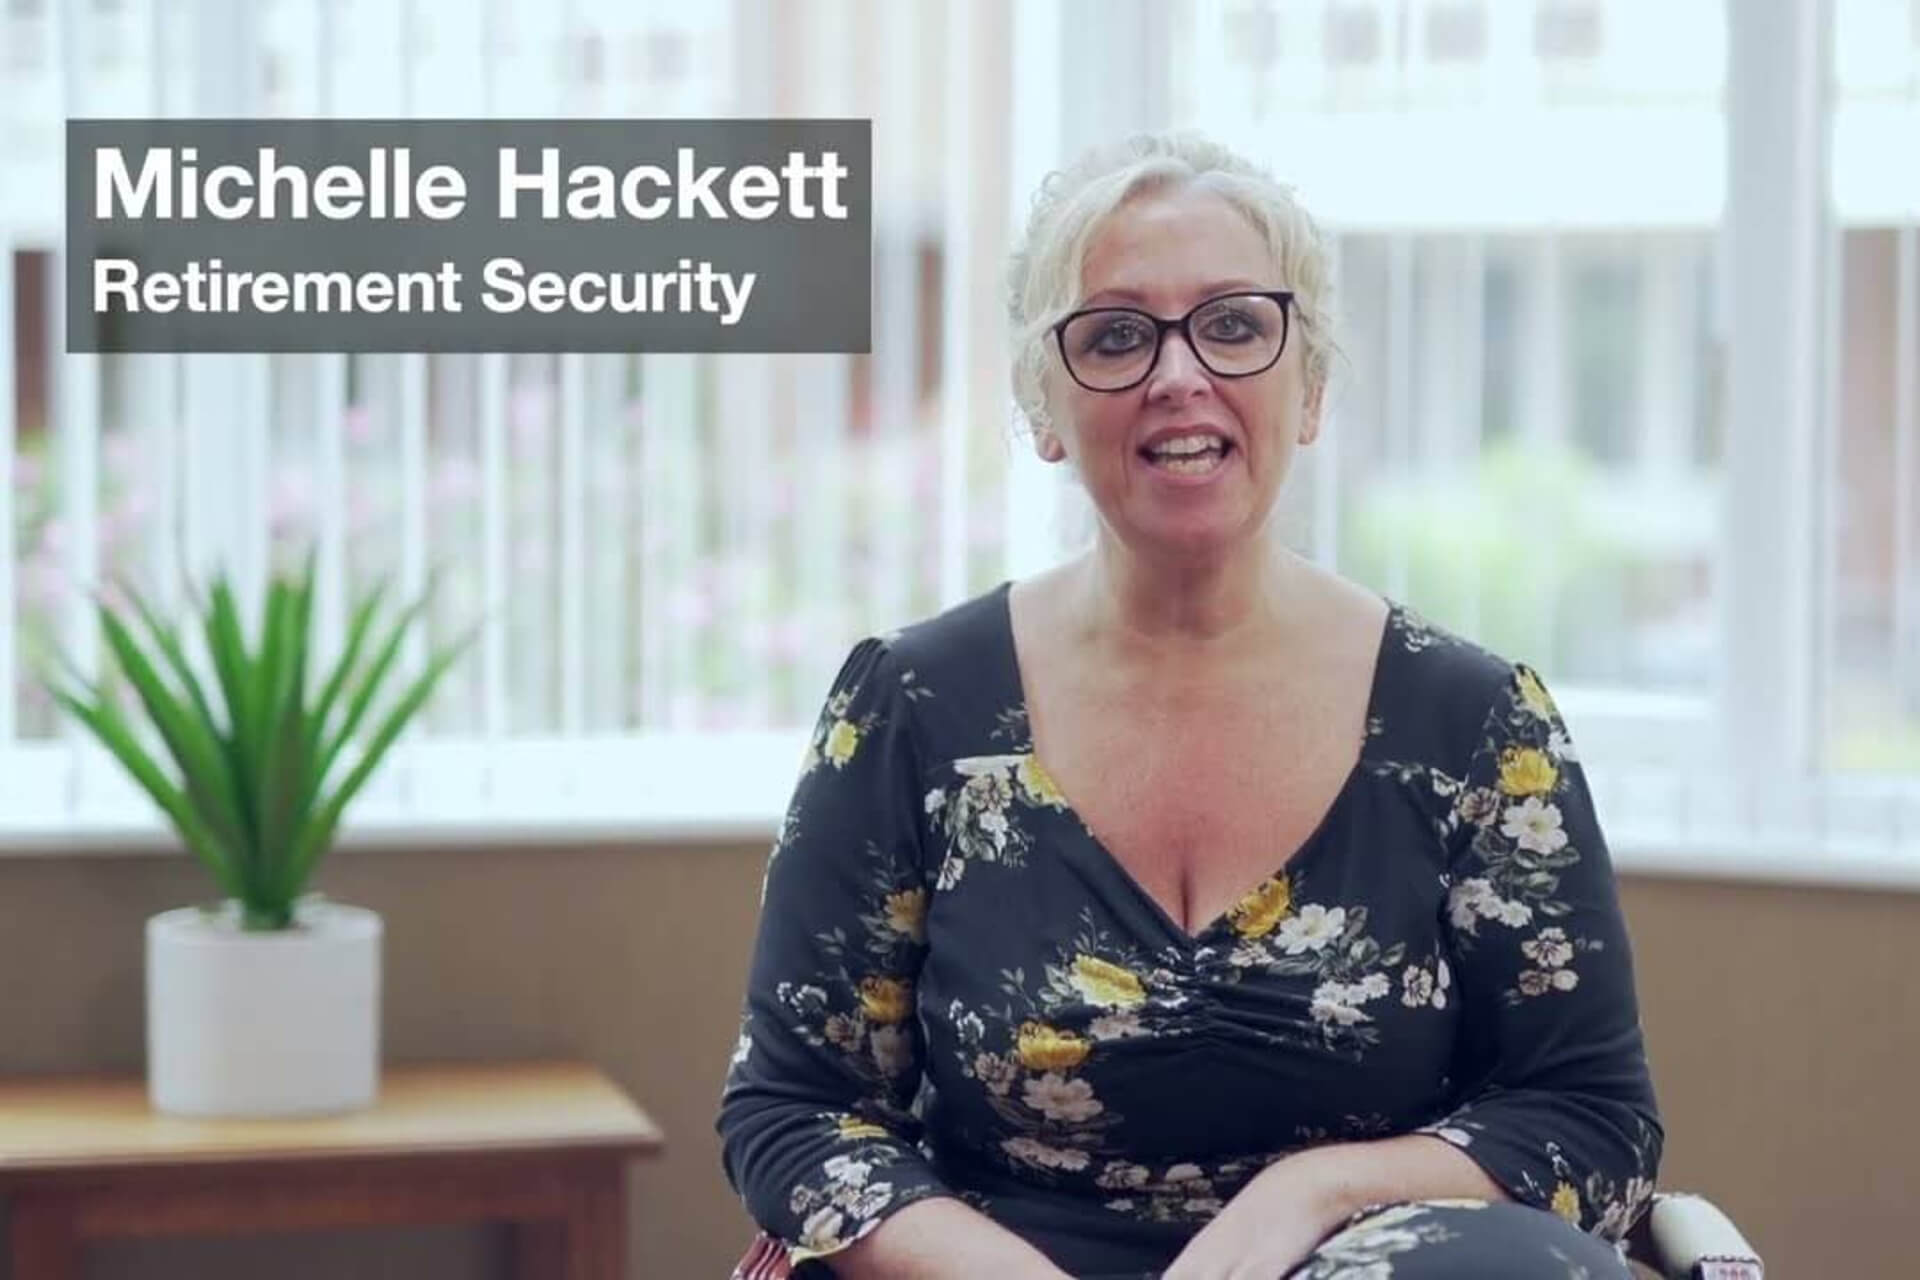 Michelle Hackett, Service Manager at Retirement Security